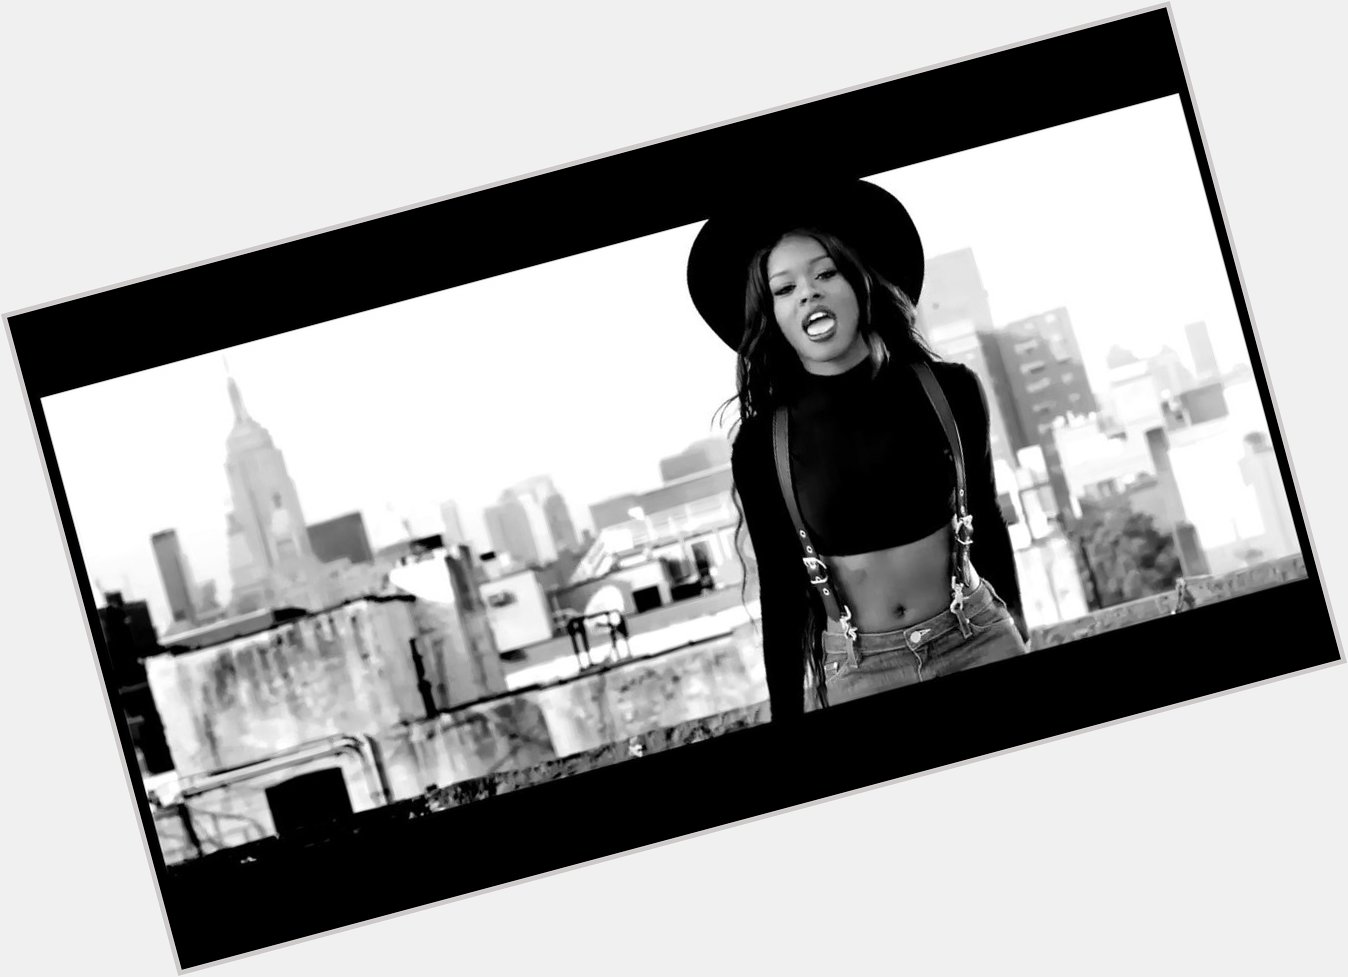 This song and music video changed me forever! happy birthday, azealia banks 